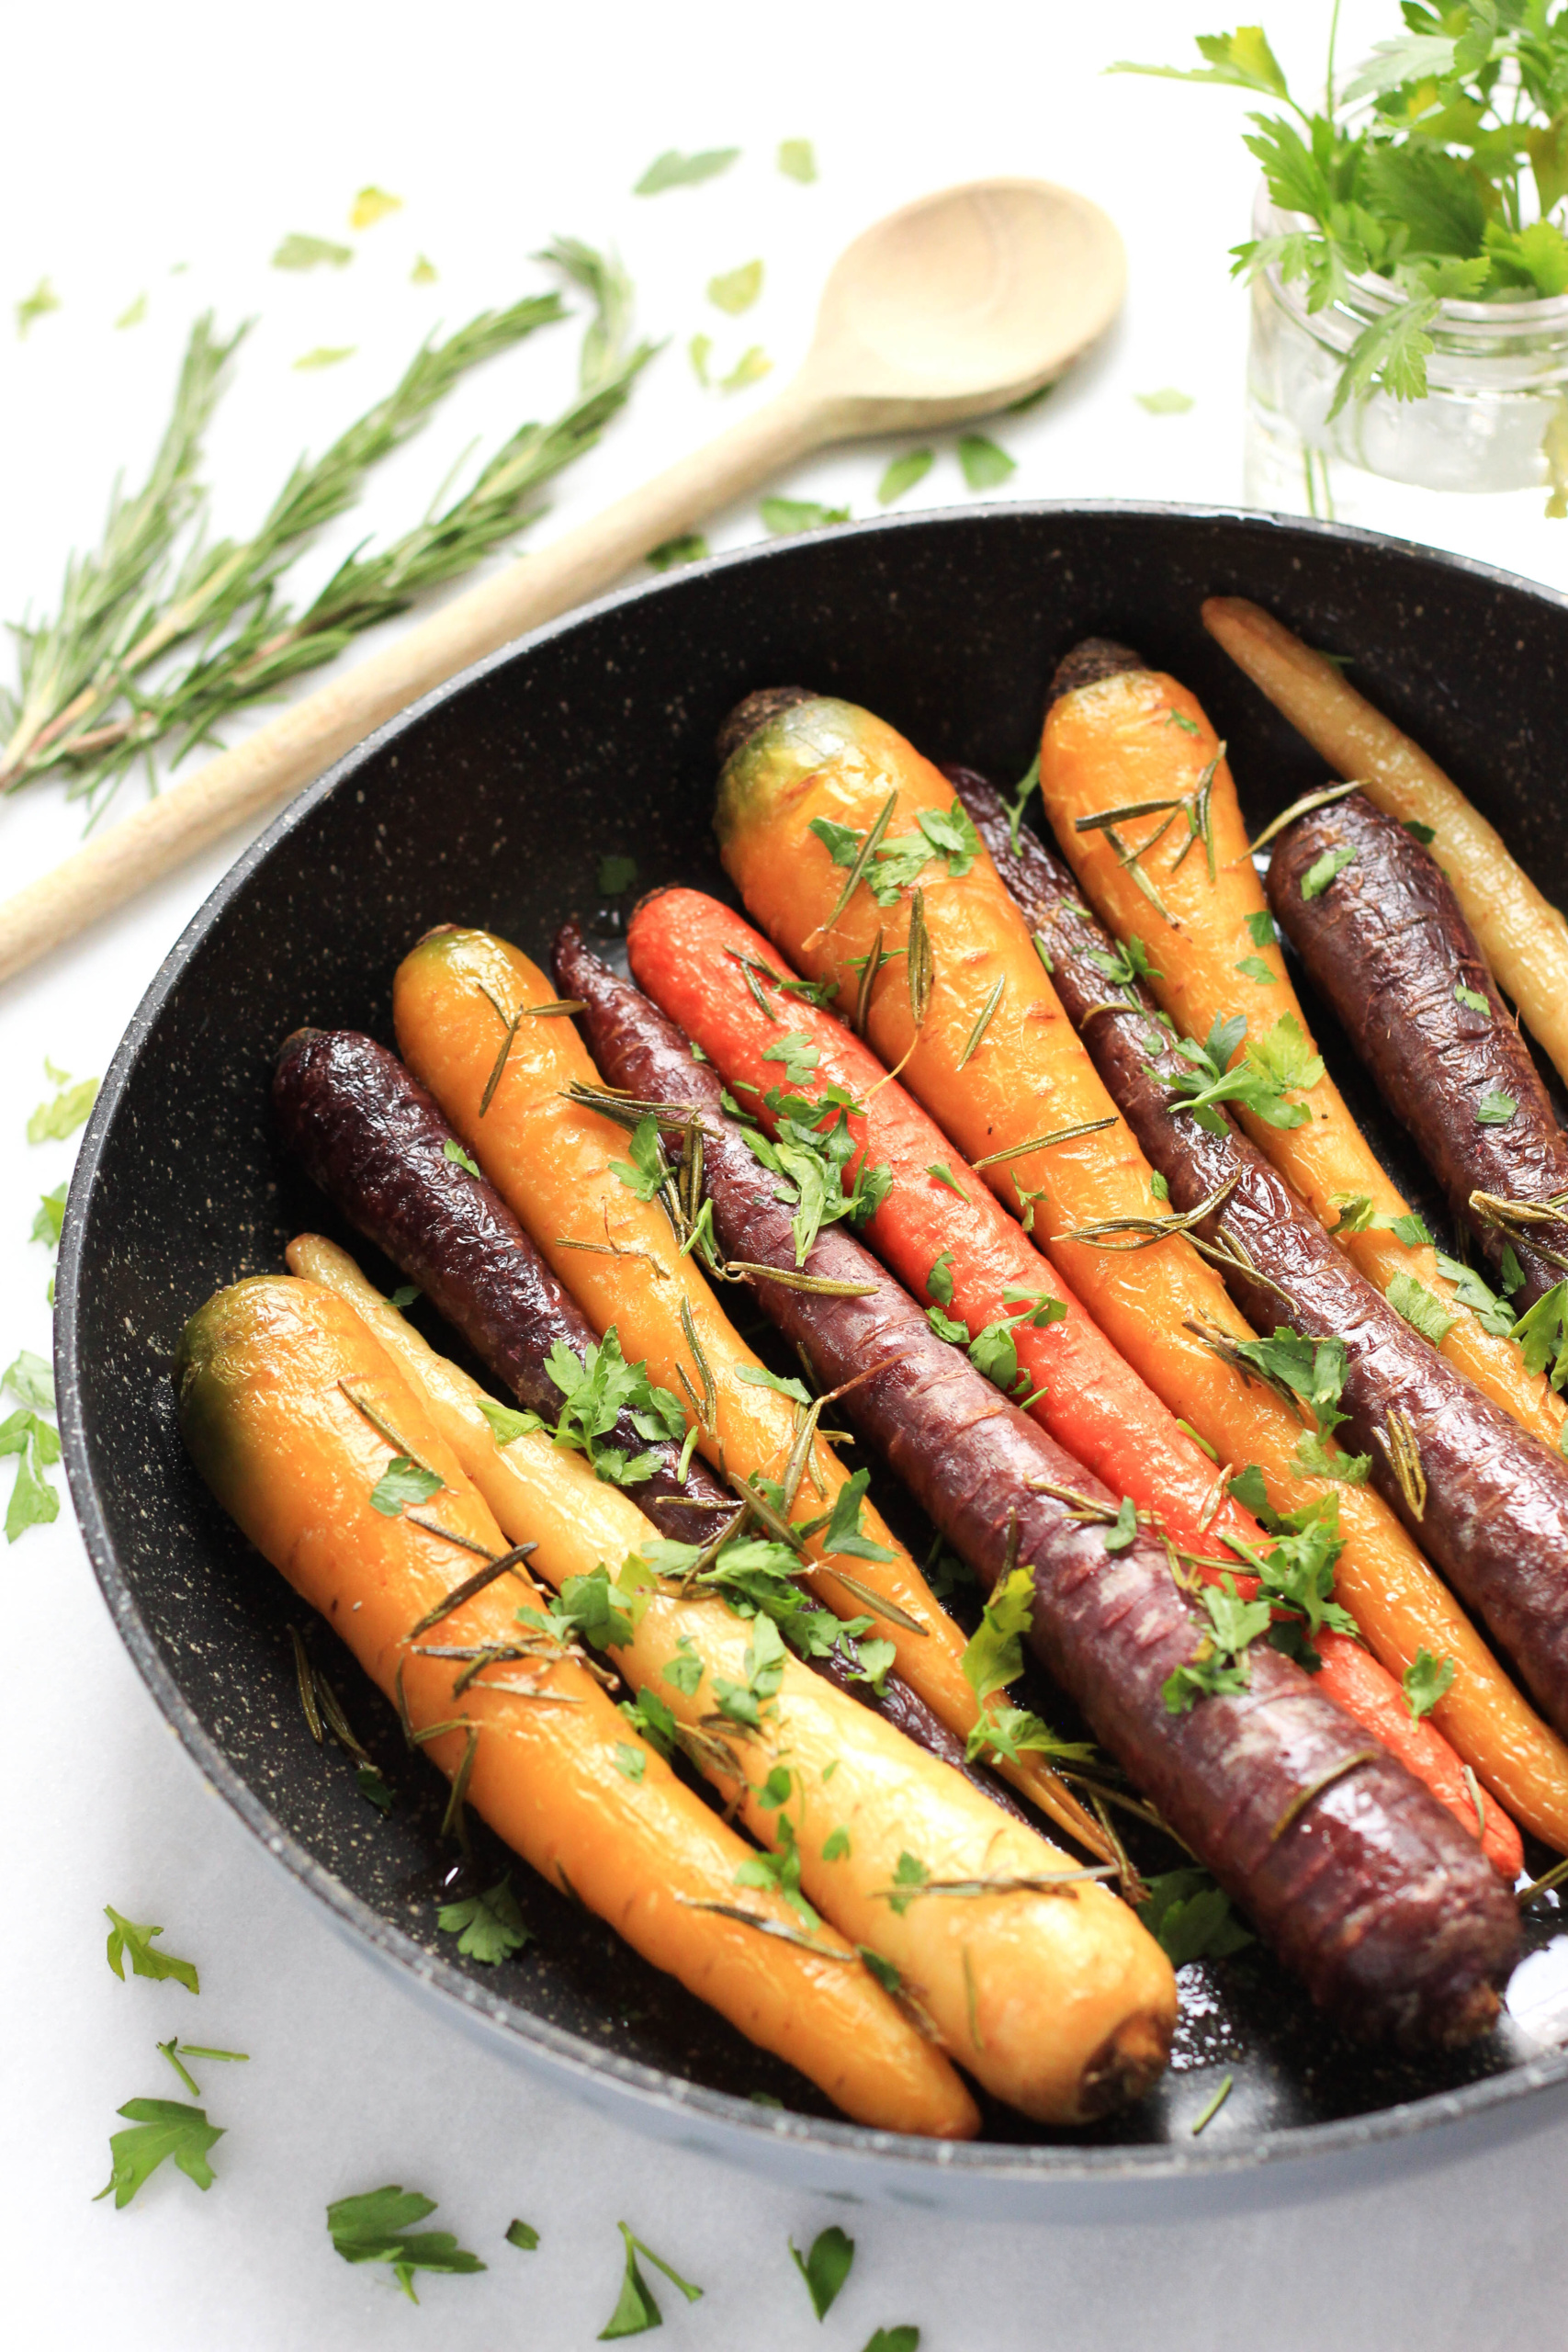 Colorful baked rainbow carrots in a skillet.